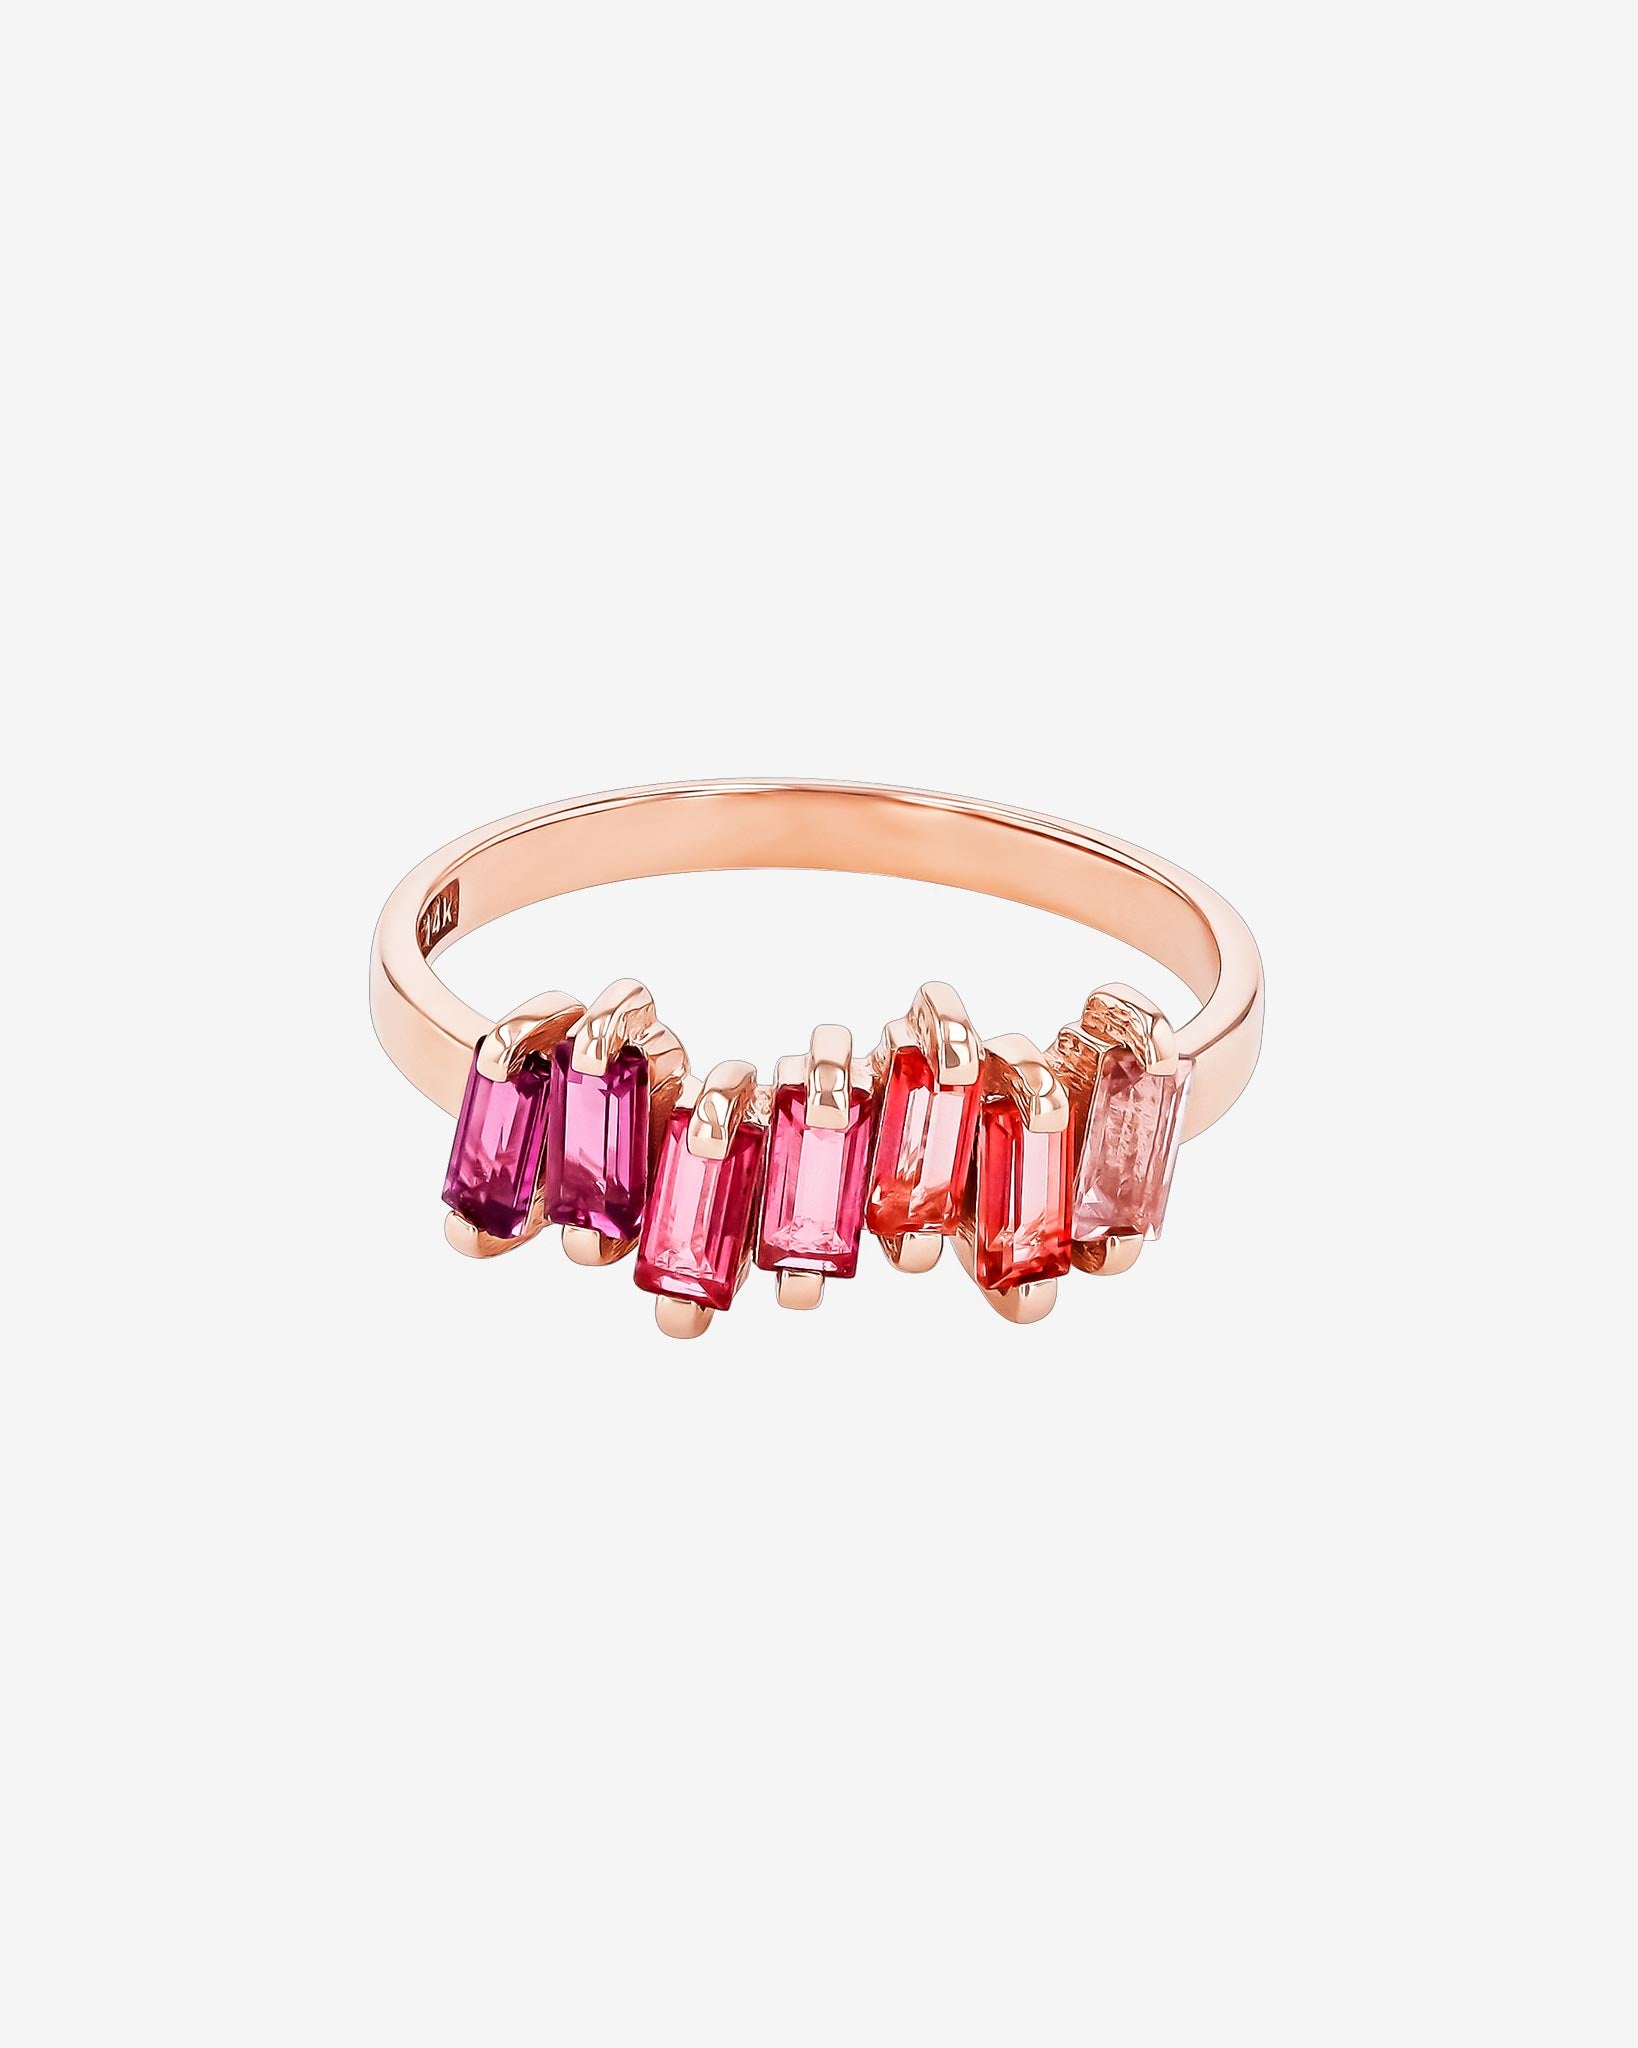 Kalan By Suzanne Kalan Amalfi Red Ombre Half Band in 14k rose gold